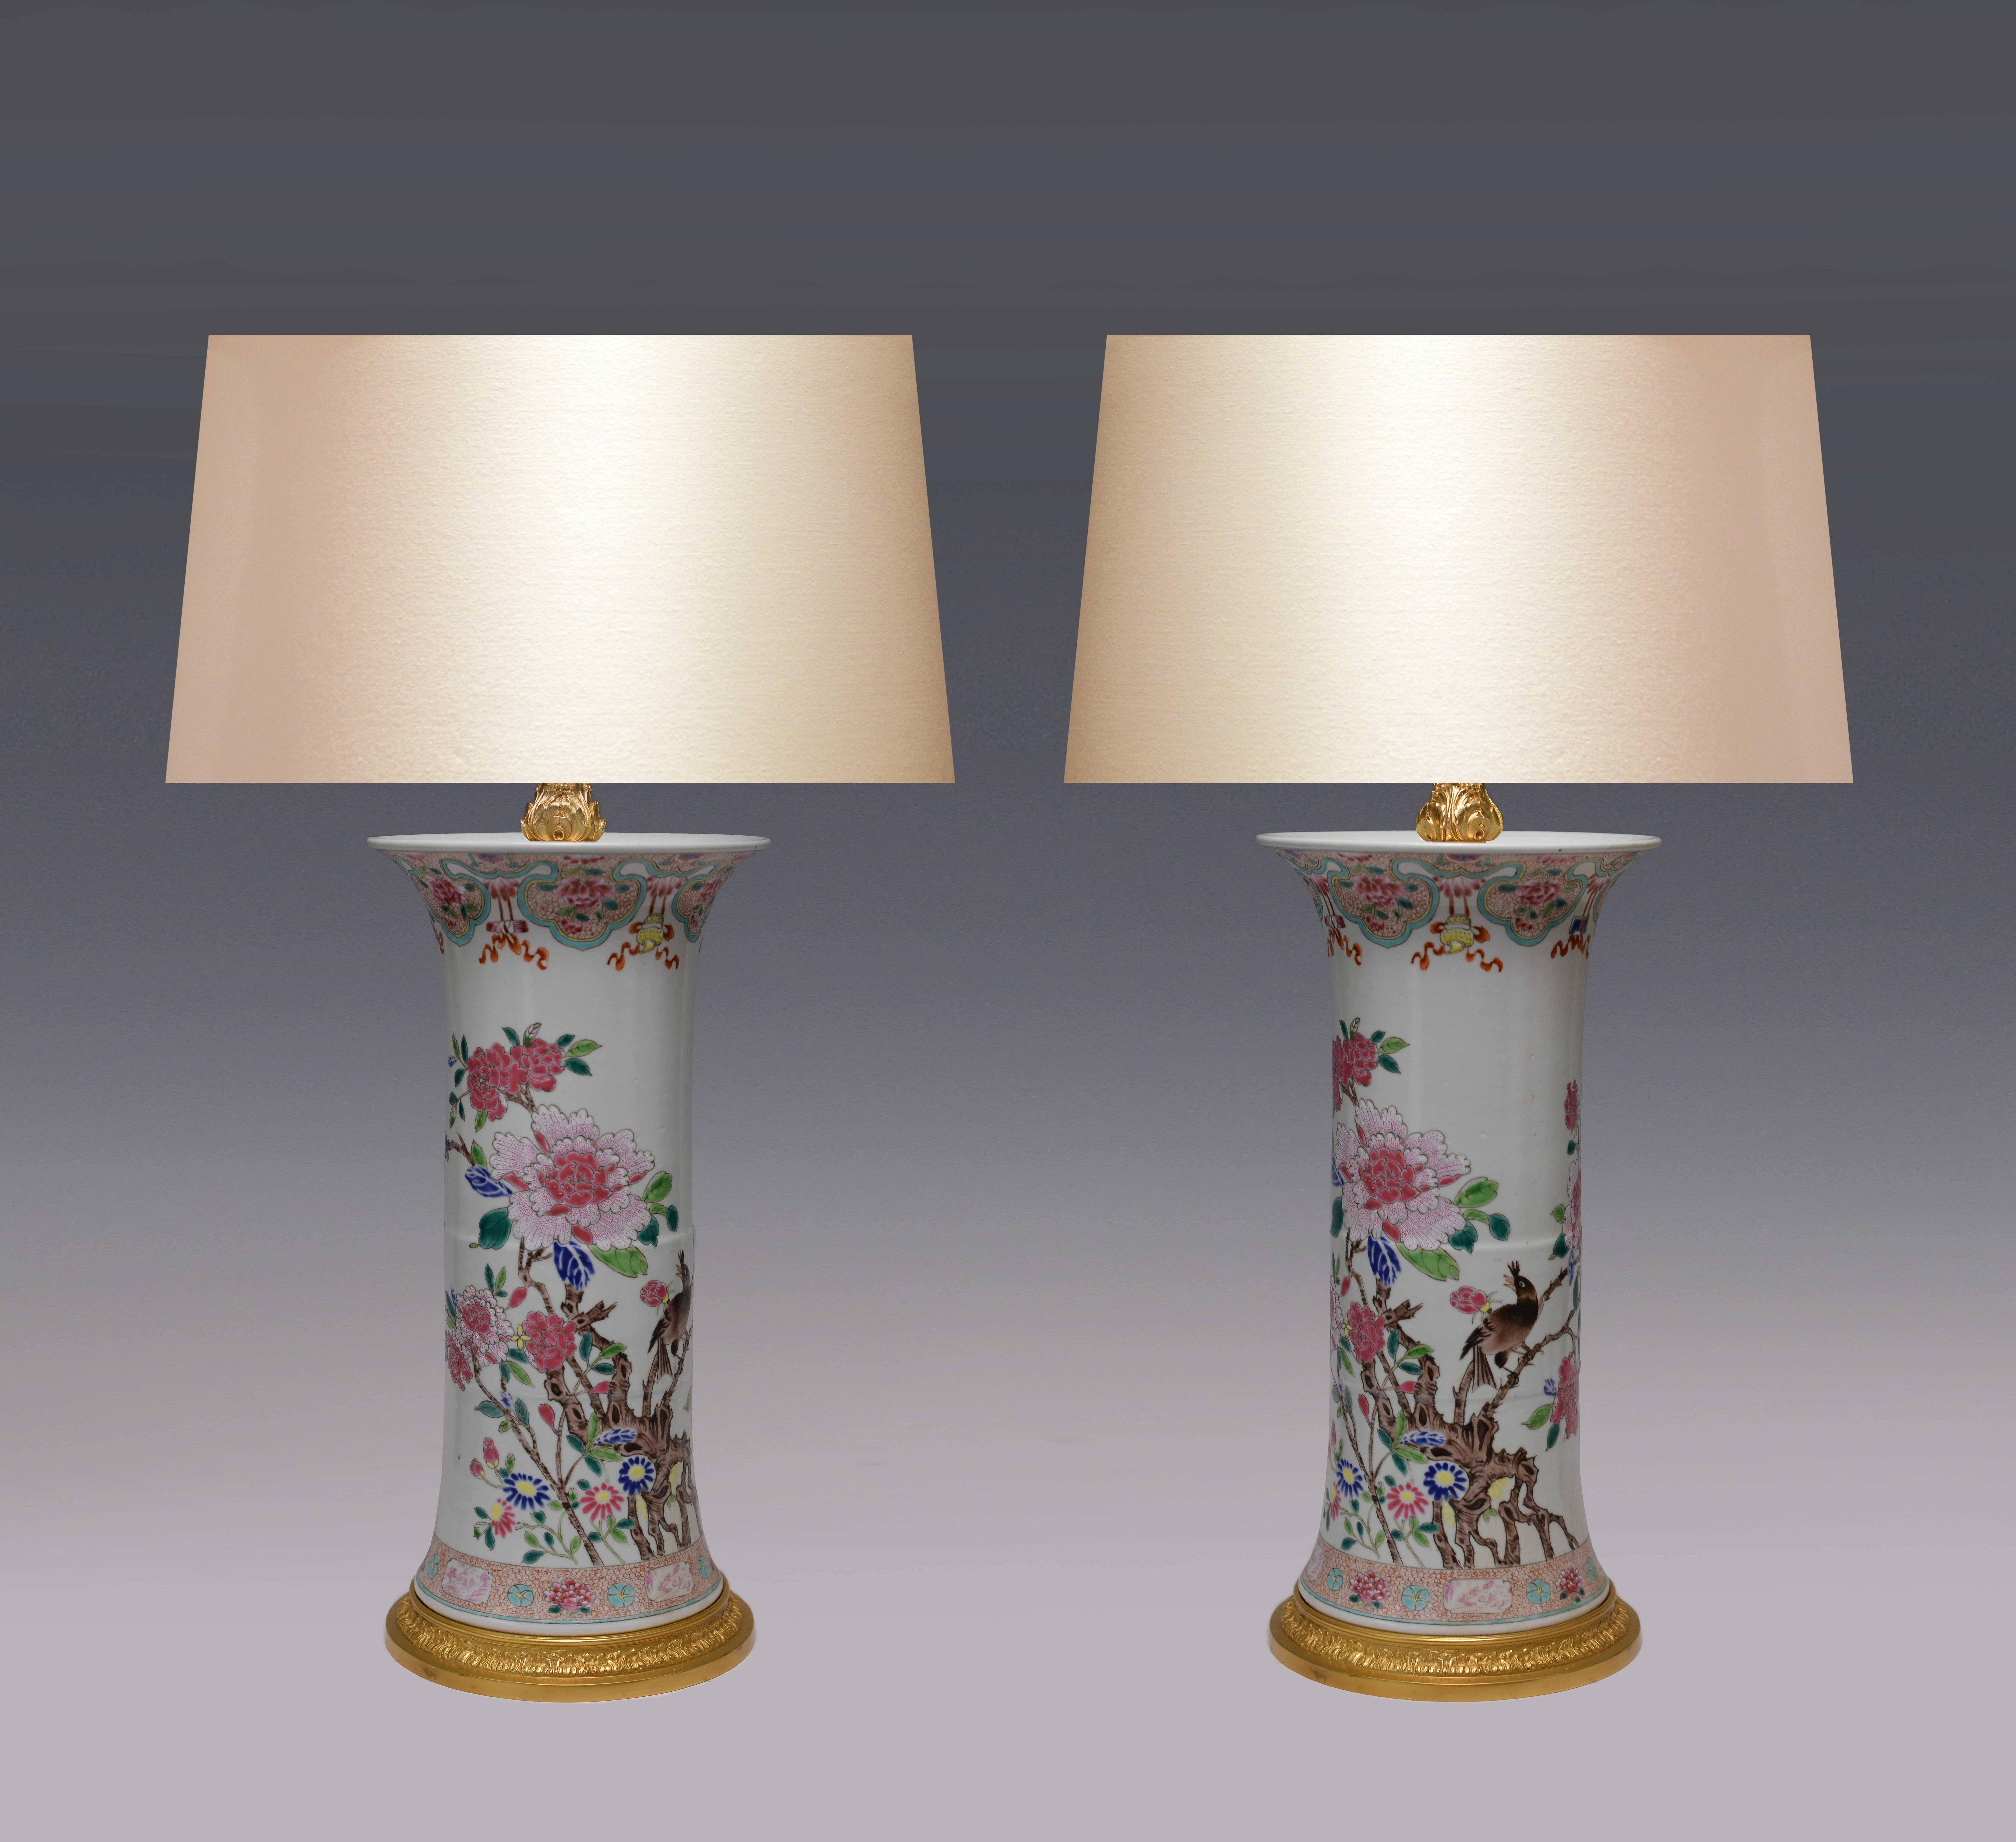 A fine painted familie rose porcelain vase lamp with bloom flower and birds decoration, fine cast brass base.
To the porcelain: 16" H.
(Lampshade not included)